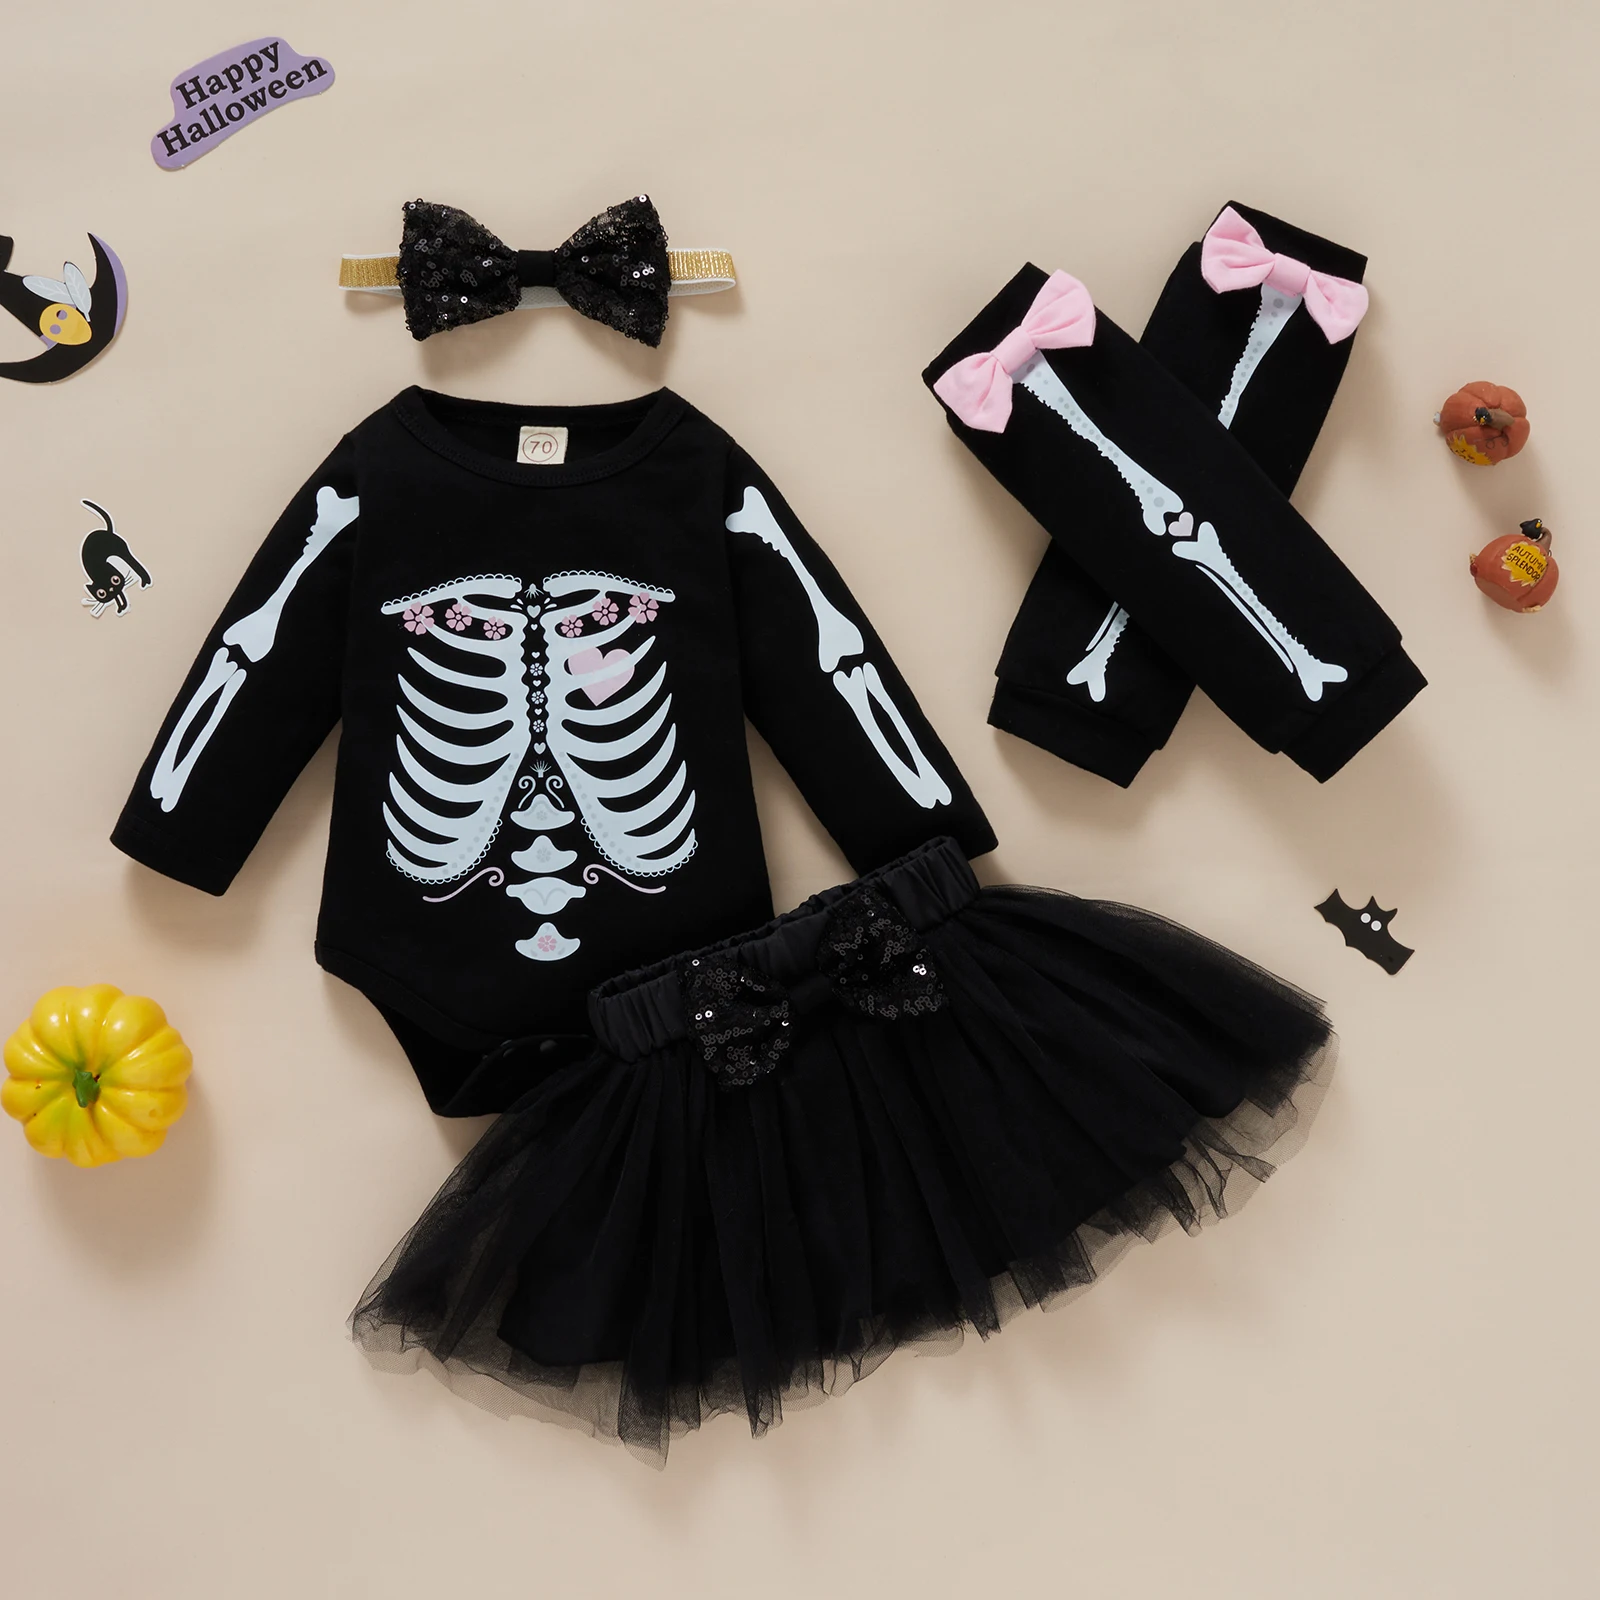 

2021 New Baby Girls Halloween Clothes Set Skeleton and Bow Knot Printed Pattern Romper, Skirt, Foot Cover and Headdress 0-12 M